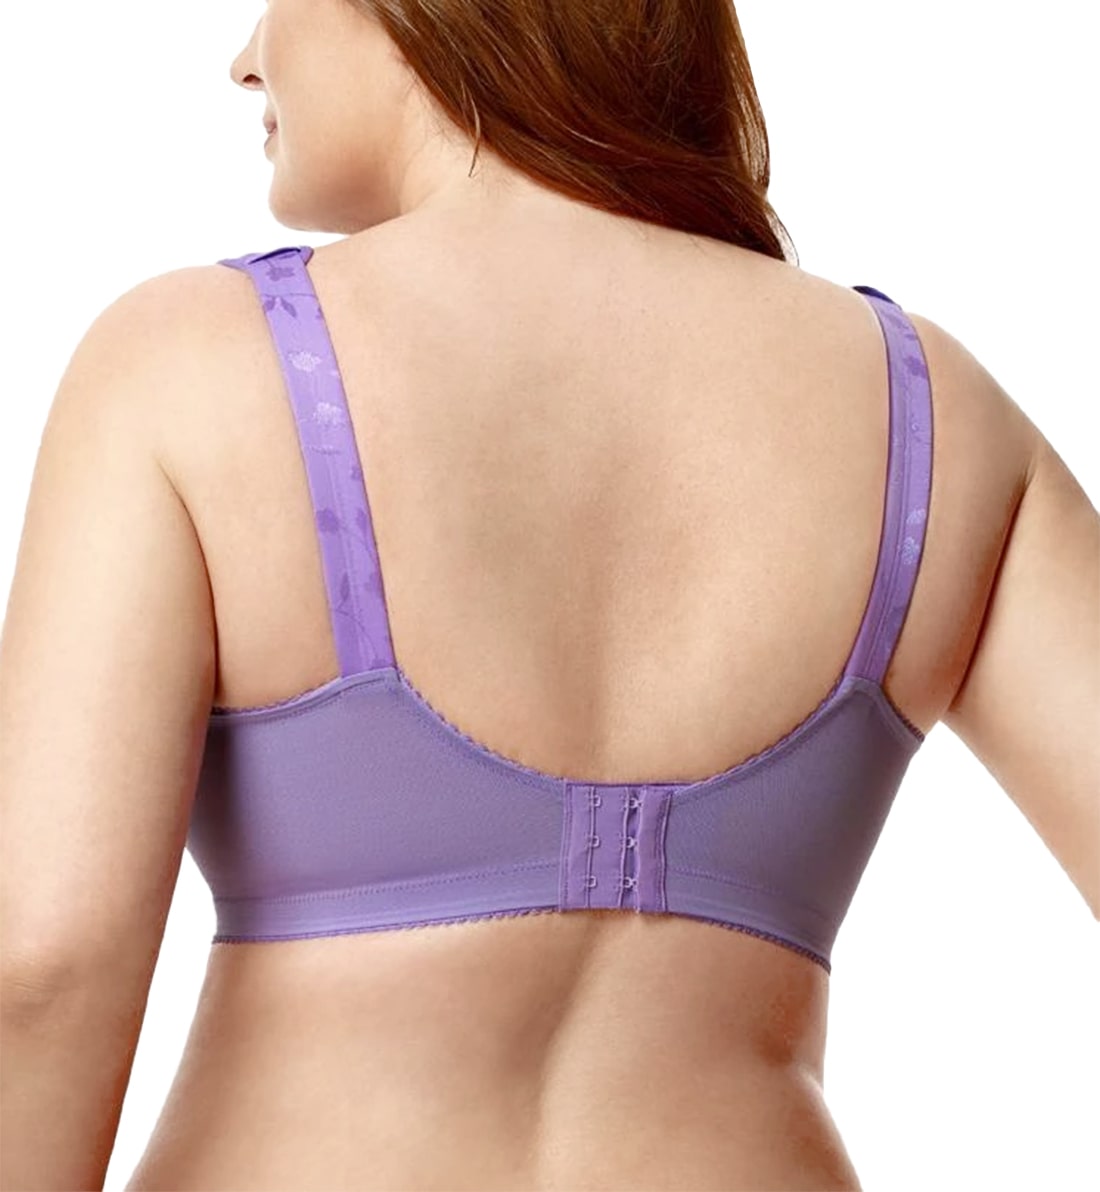 Elila Jacquard Full Support Softcup (1305),34F,Lilac - Lilac,34F